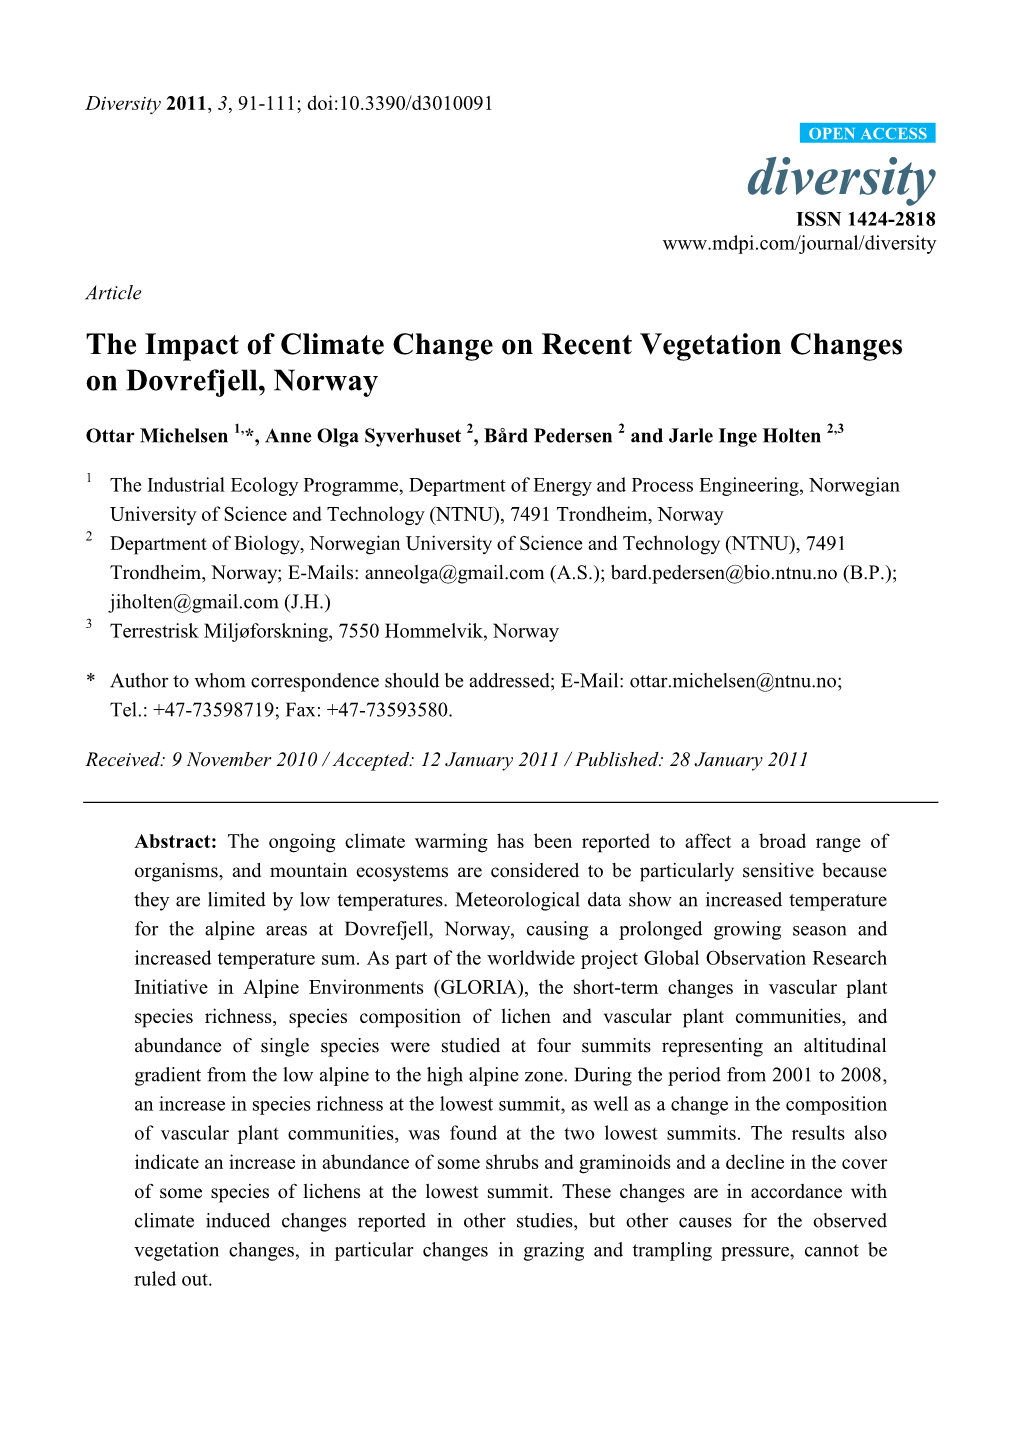 The Impact of Climate Change on Recent Vegetation Changes on Dovrefjell, Norway